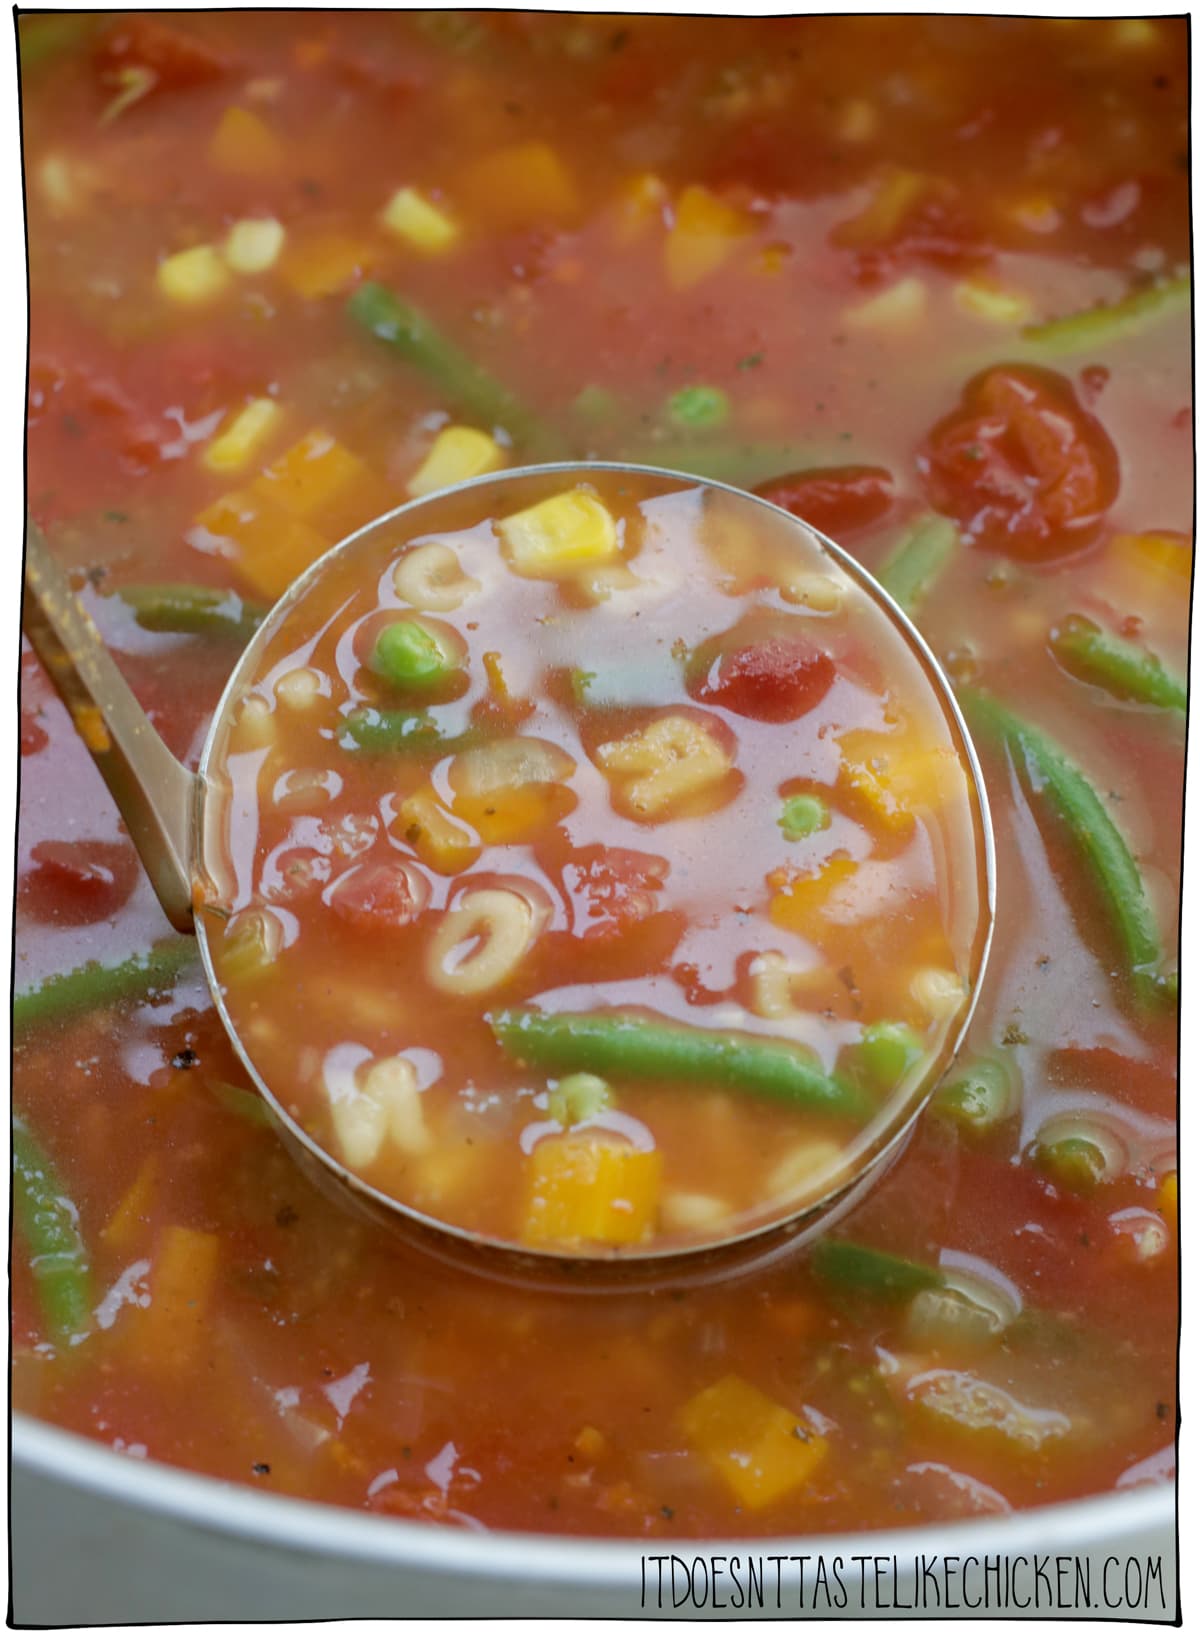 Easy Vegan Alphabet Soup! Healthy homemade soup recipe that's fun to eat! Perfect for lunches or an easy meal. Freezer-friendly. Gluten-free and oil-free options. #itdoesnttastelikechicken #veganrecipes #soup